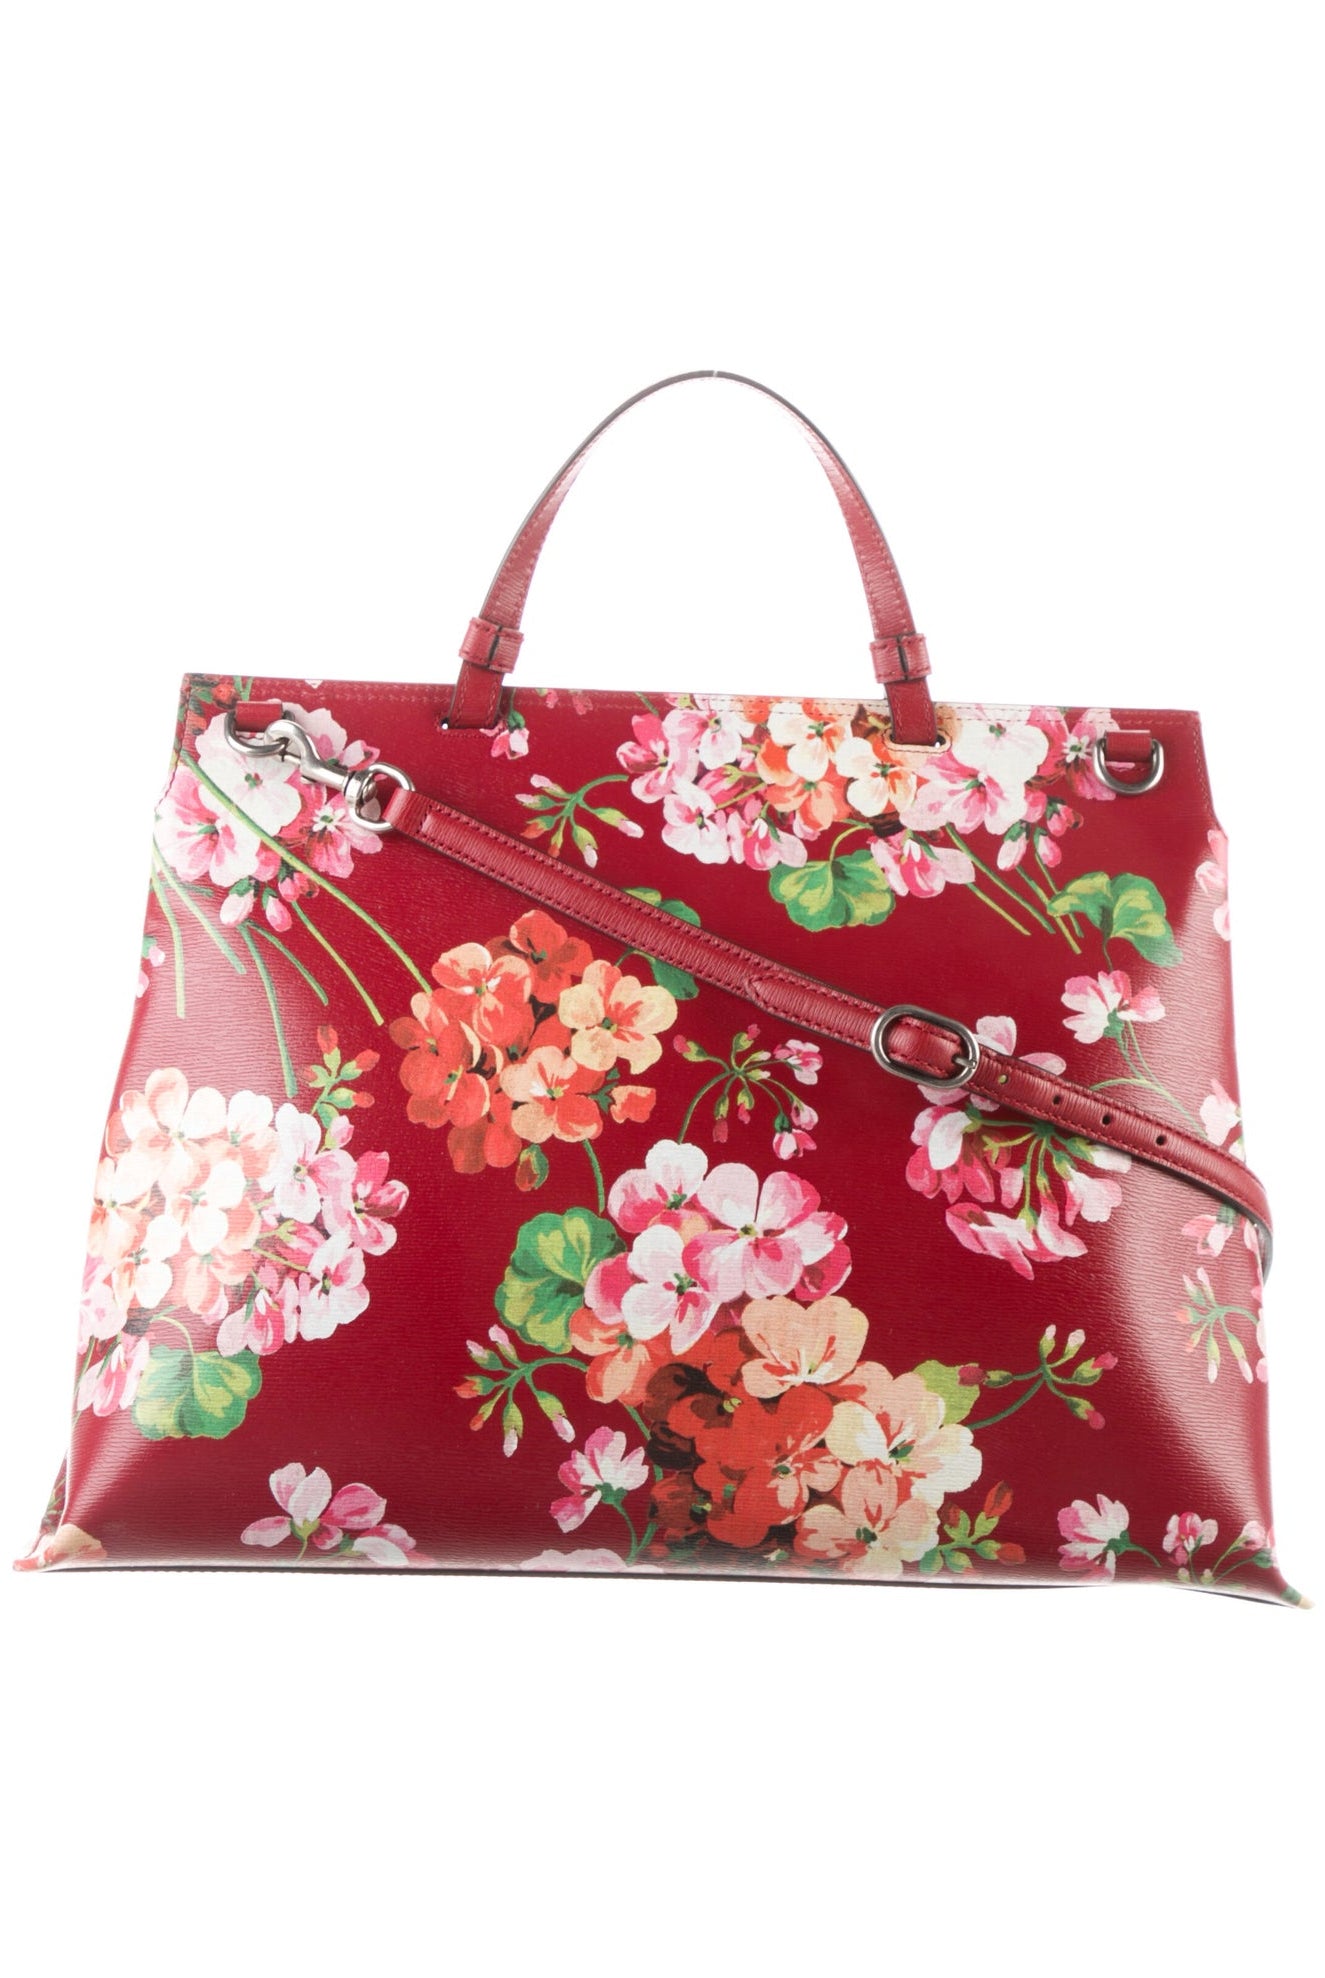 GUCCI Bamboo Blooms Daily Top Handle Bag